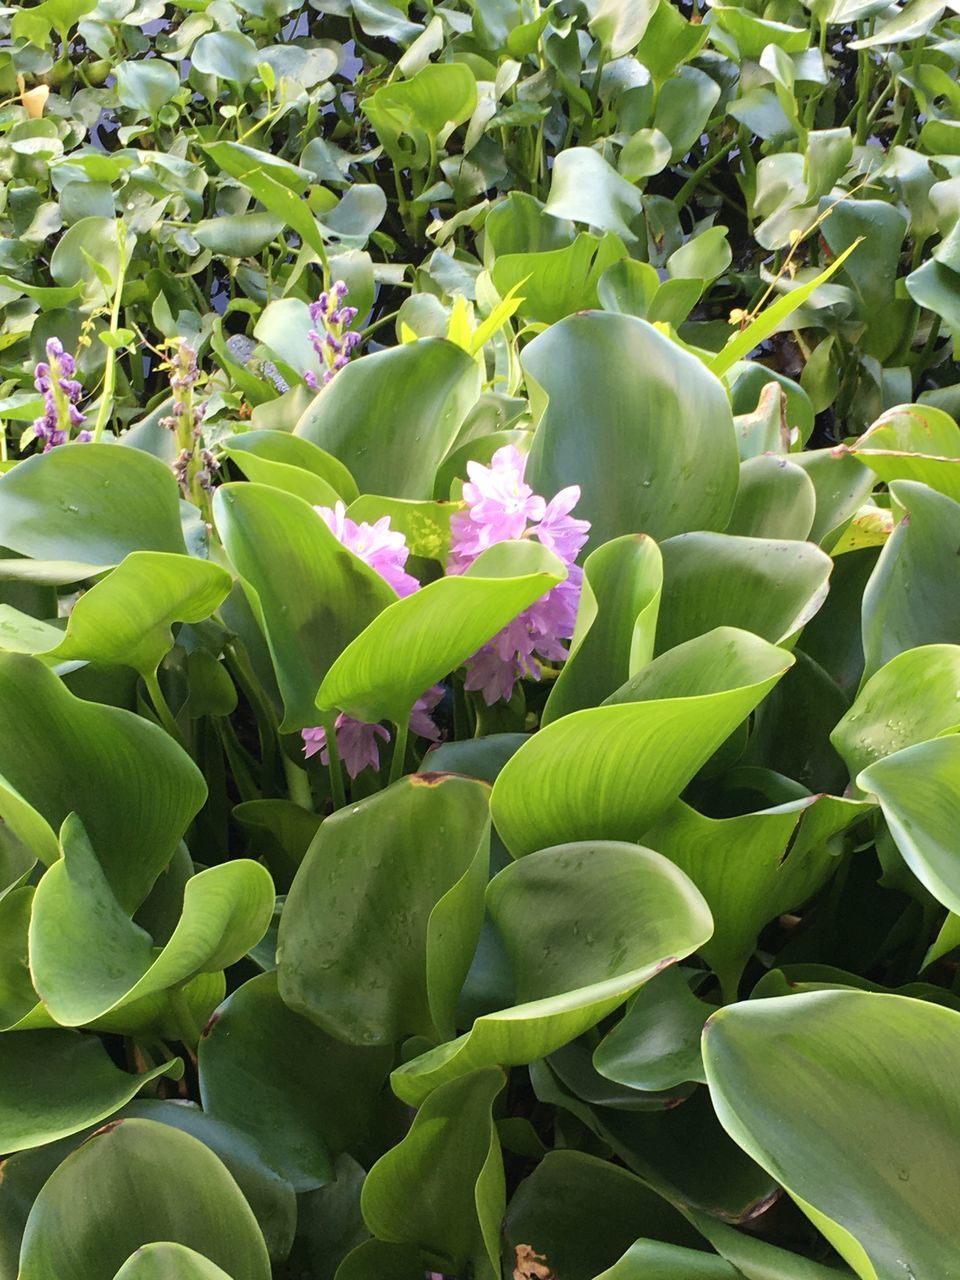 CLOSE-UP OF GREEN FLOWERING PLANTS